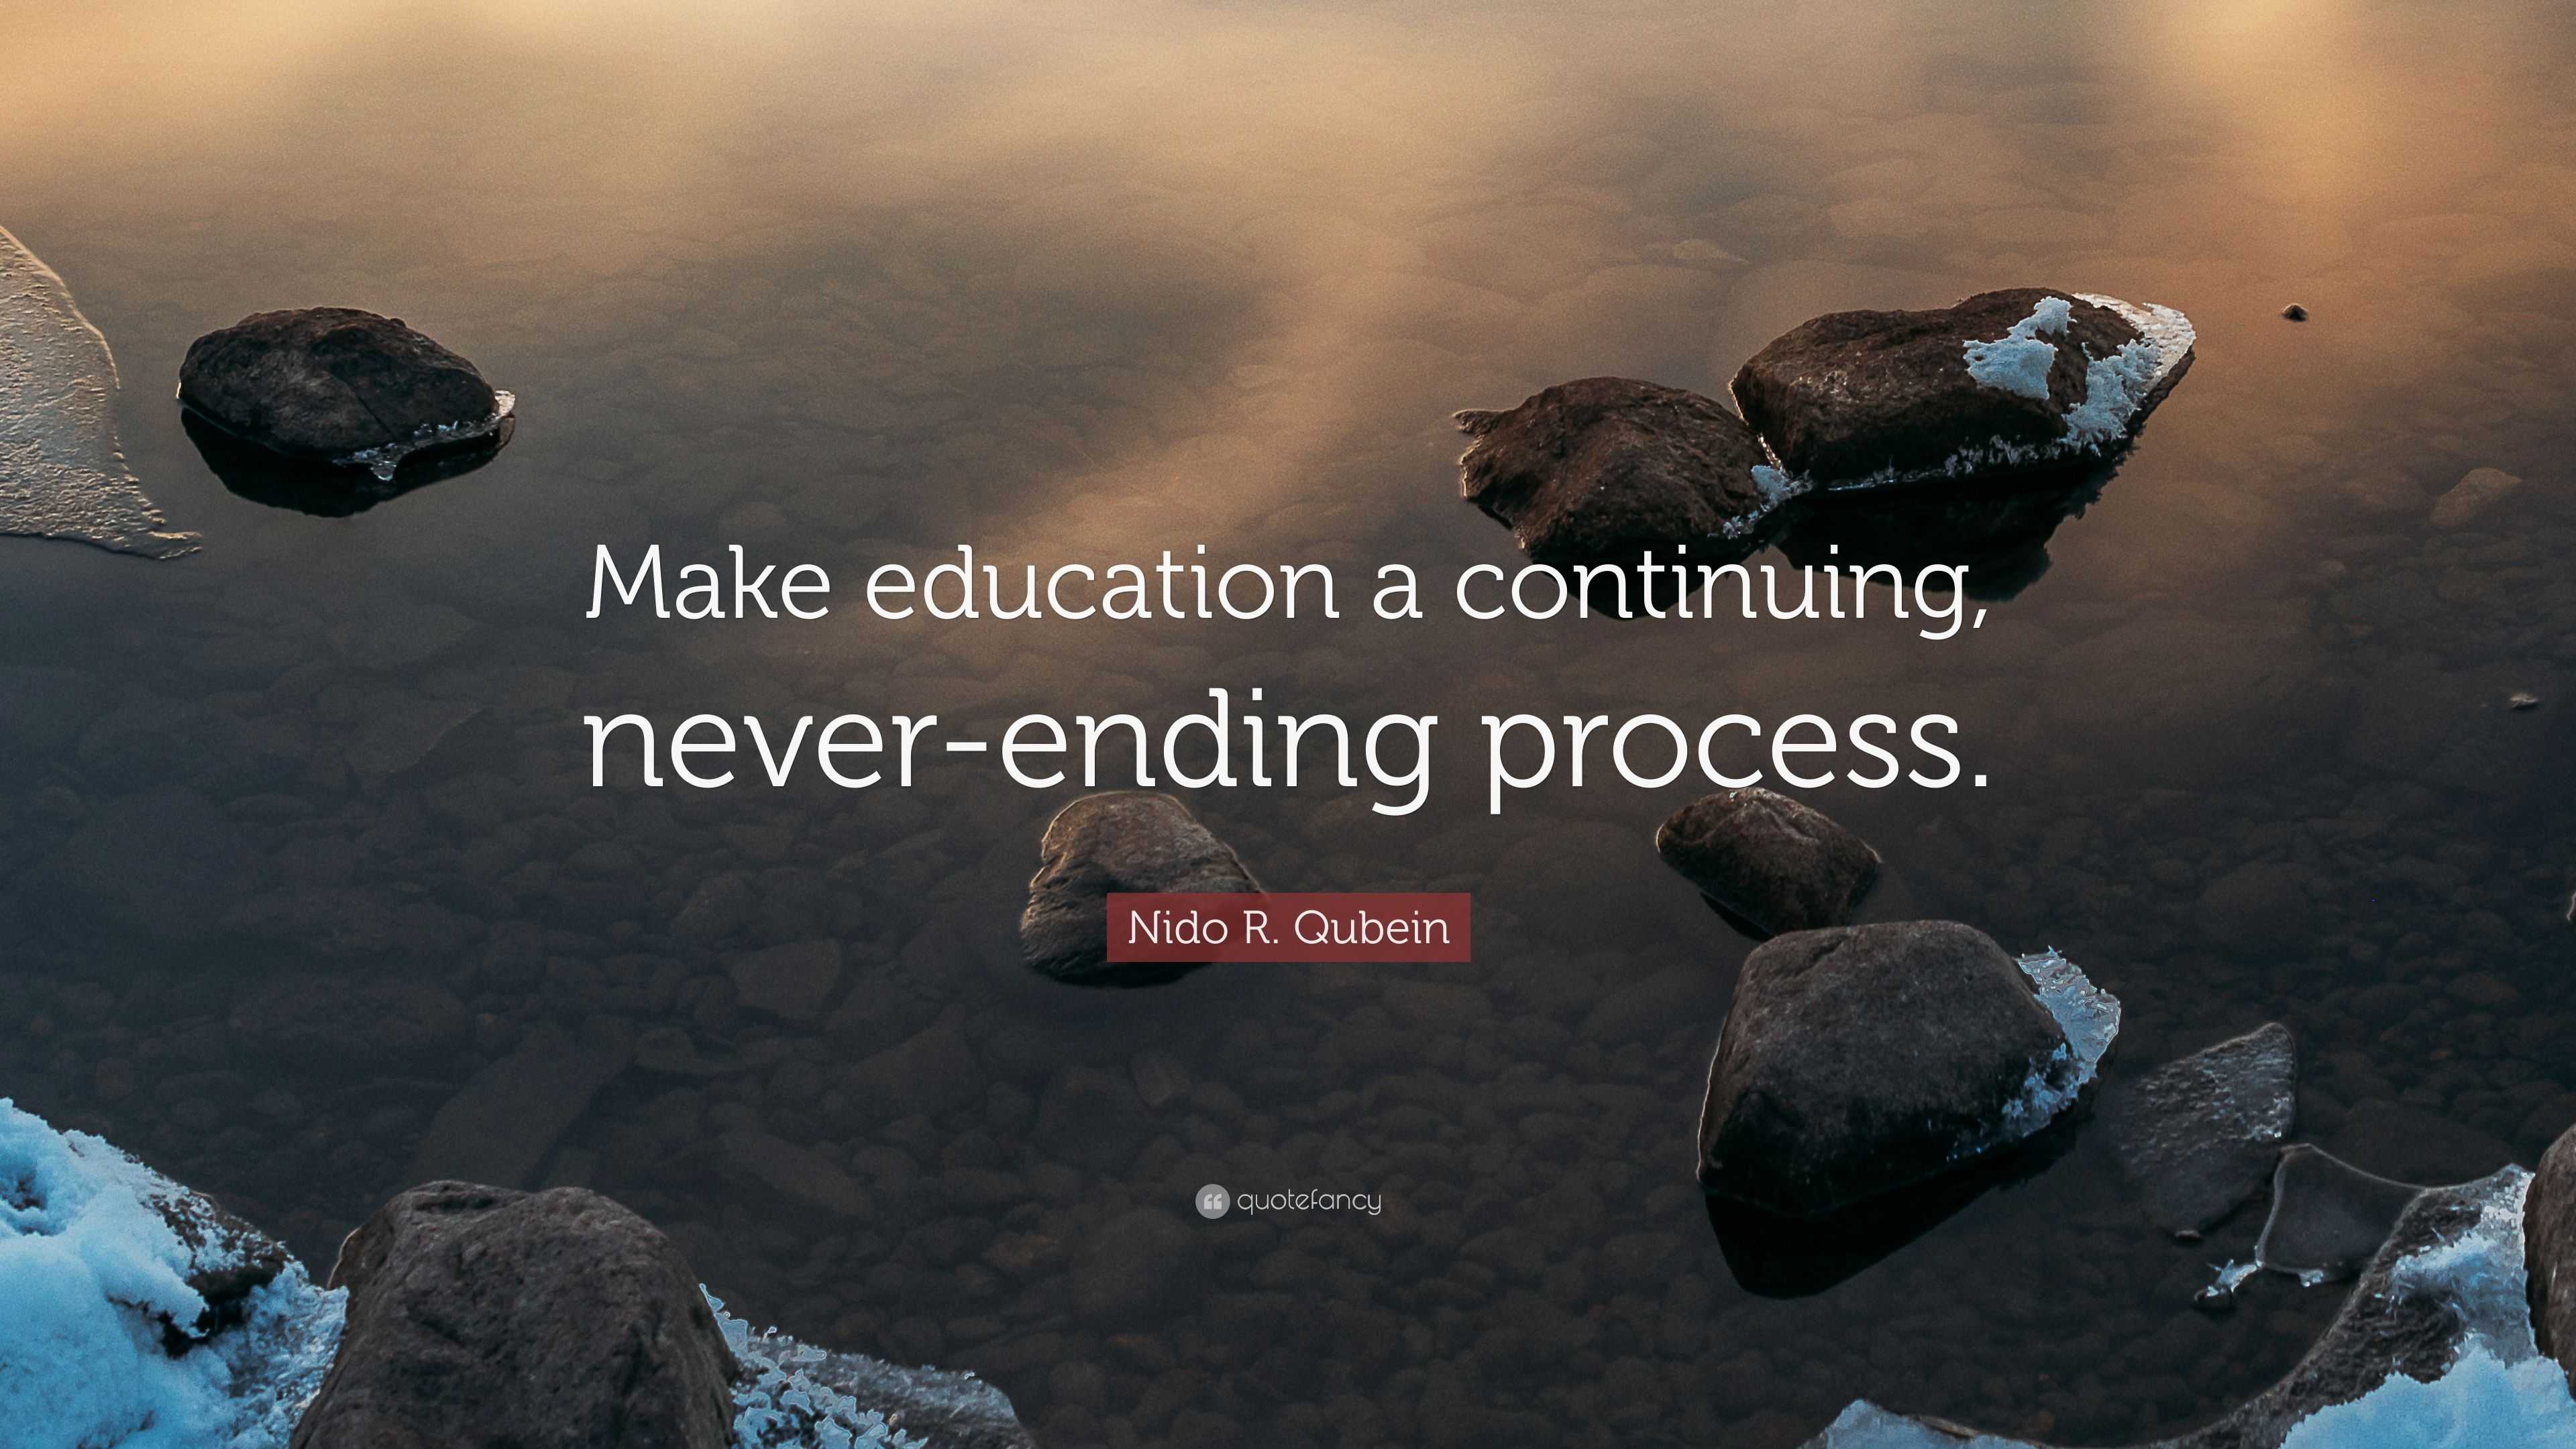 education is a long process that not only